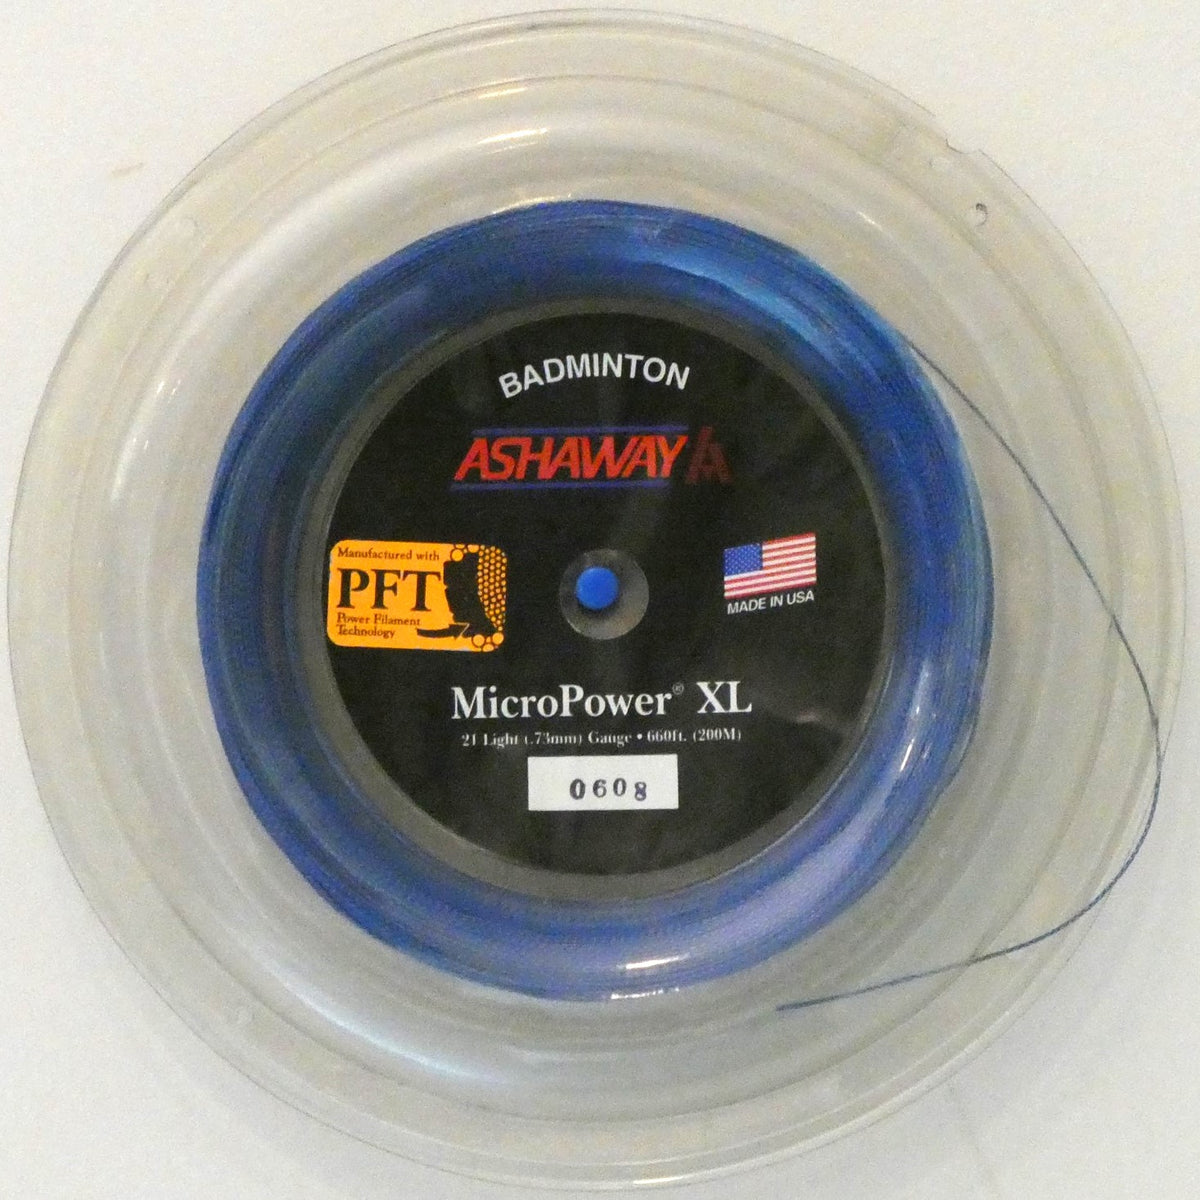 Ashaway MicroPowerXL Badminton String, Blue with Electric Blue spiral, 200 M REEL